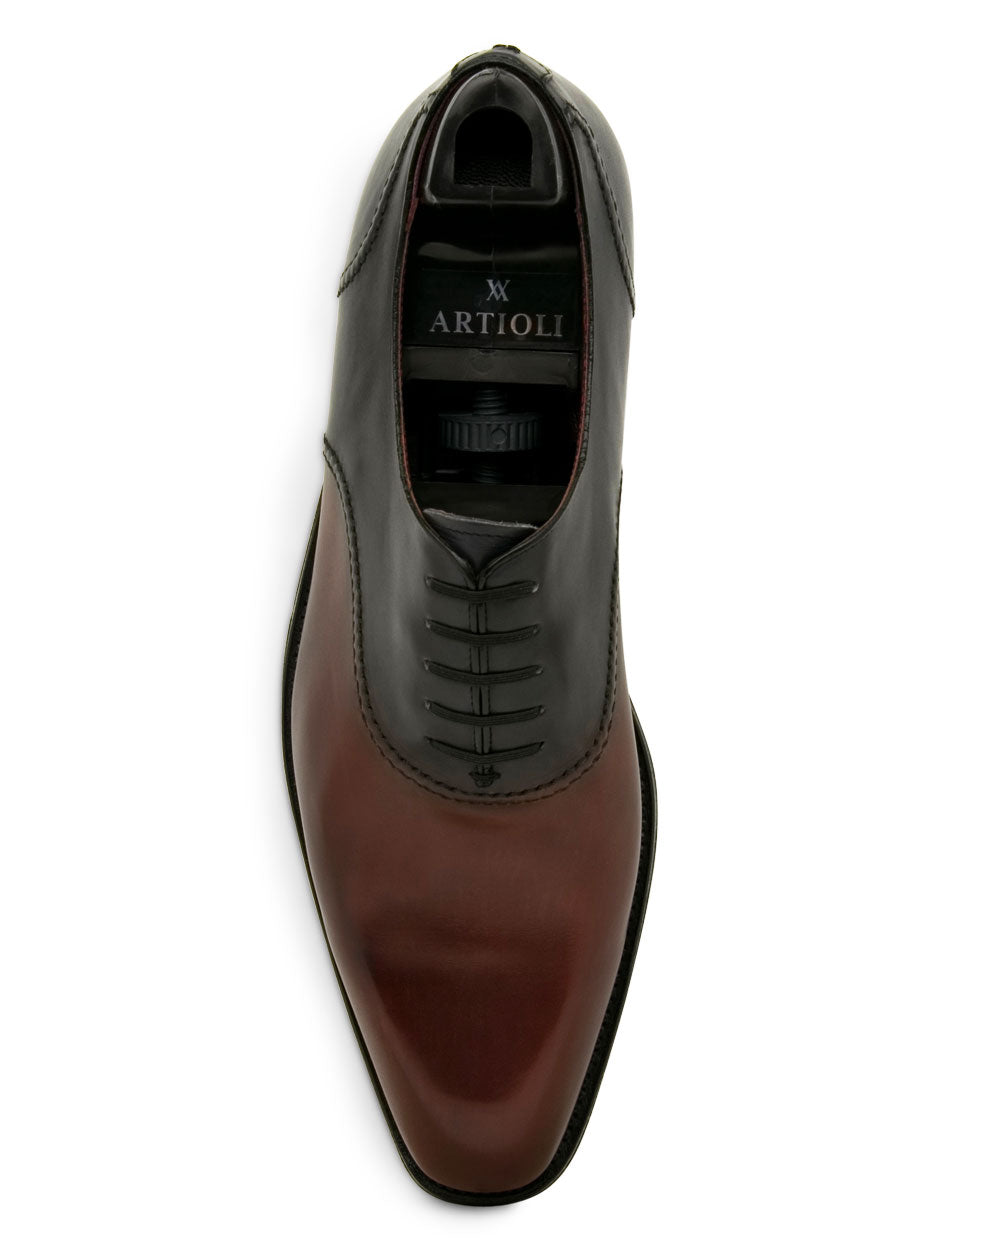 Oxford in Chestnut and Charcoal